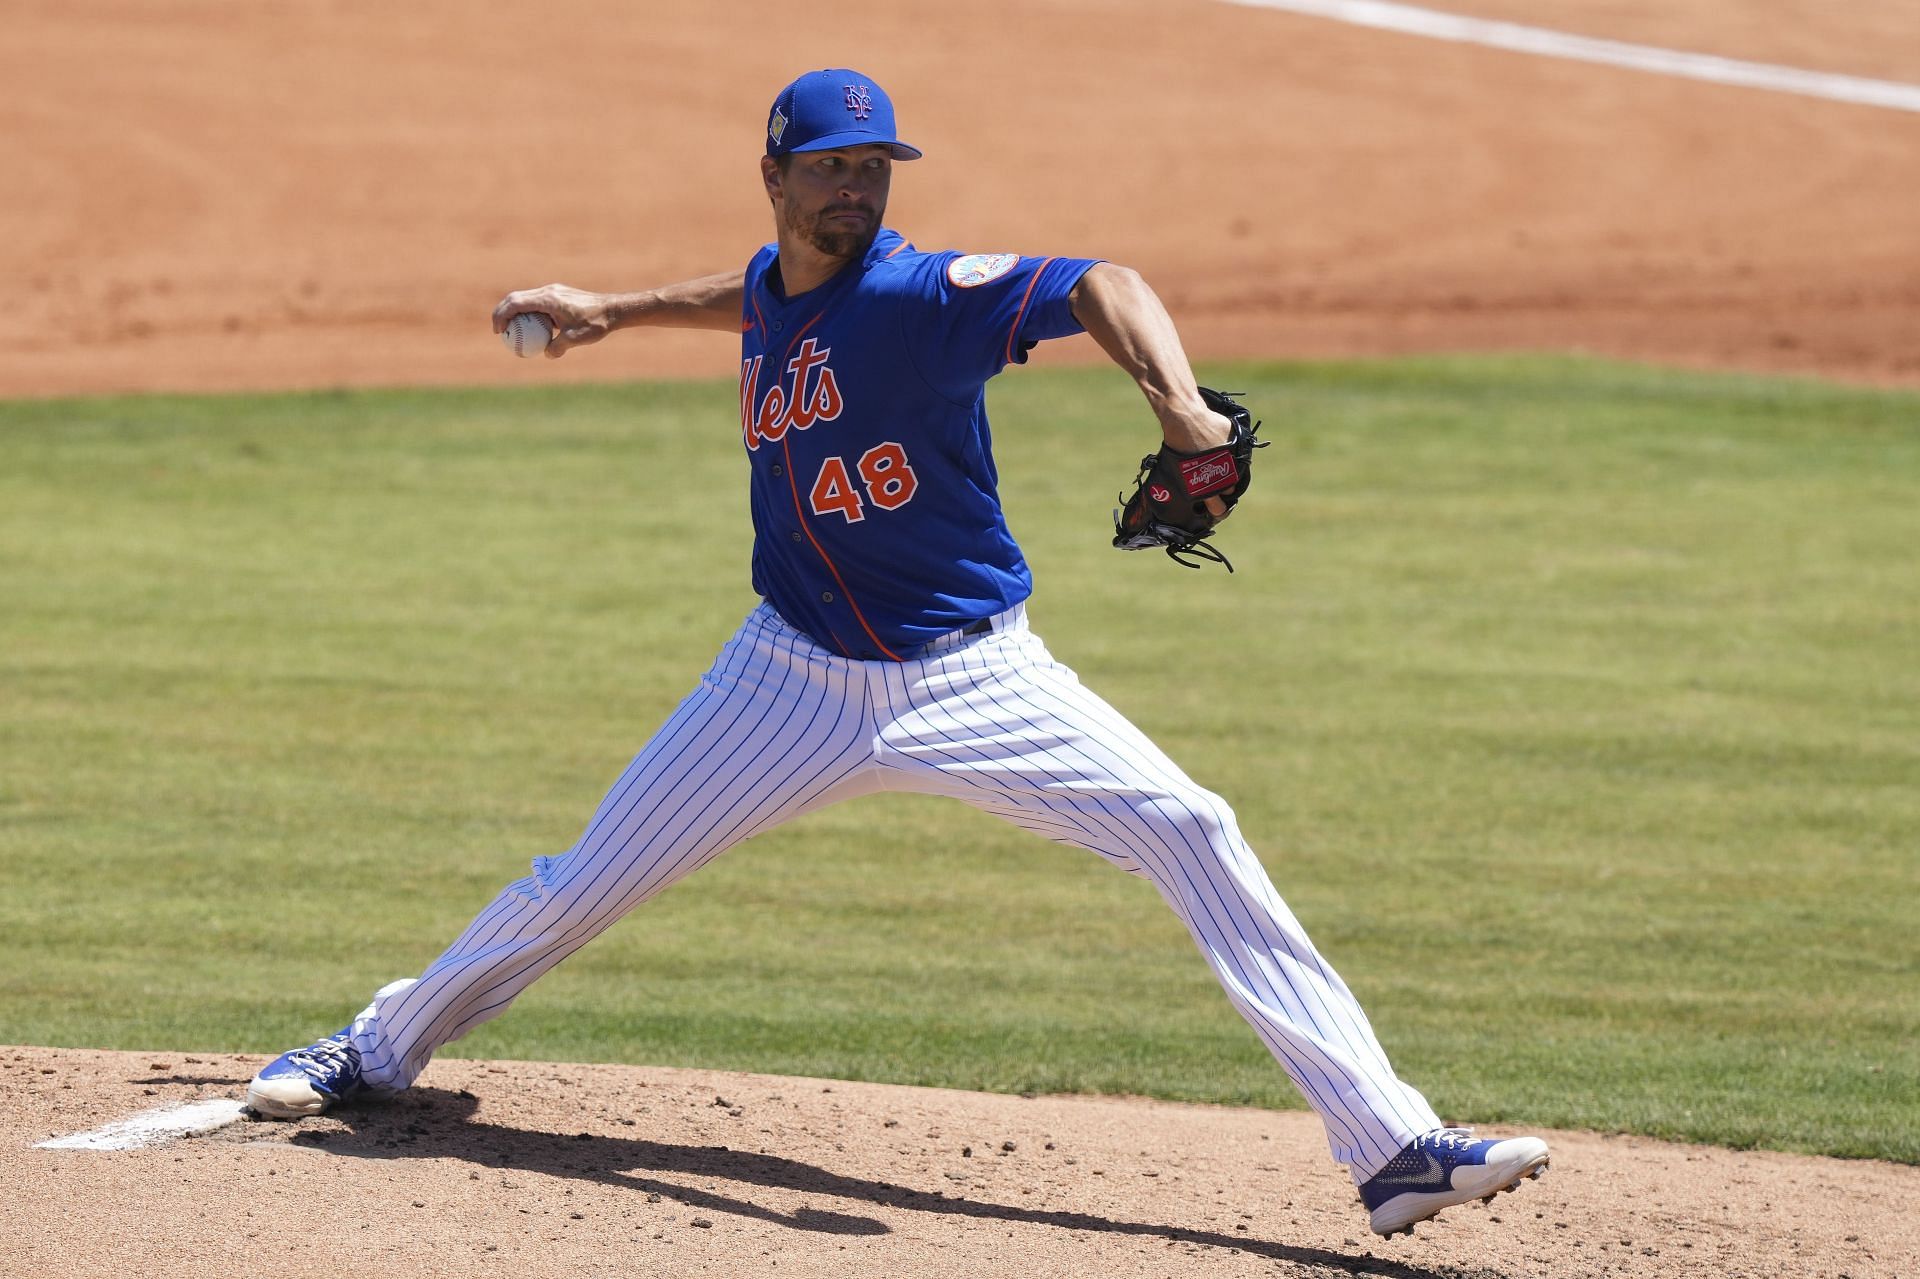 New York Mets starter Jacob deGrom has been known to throw some serious heat